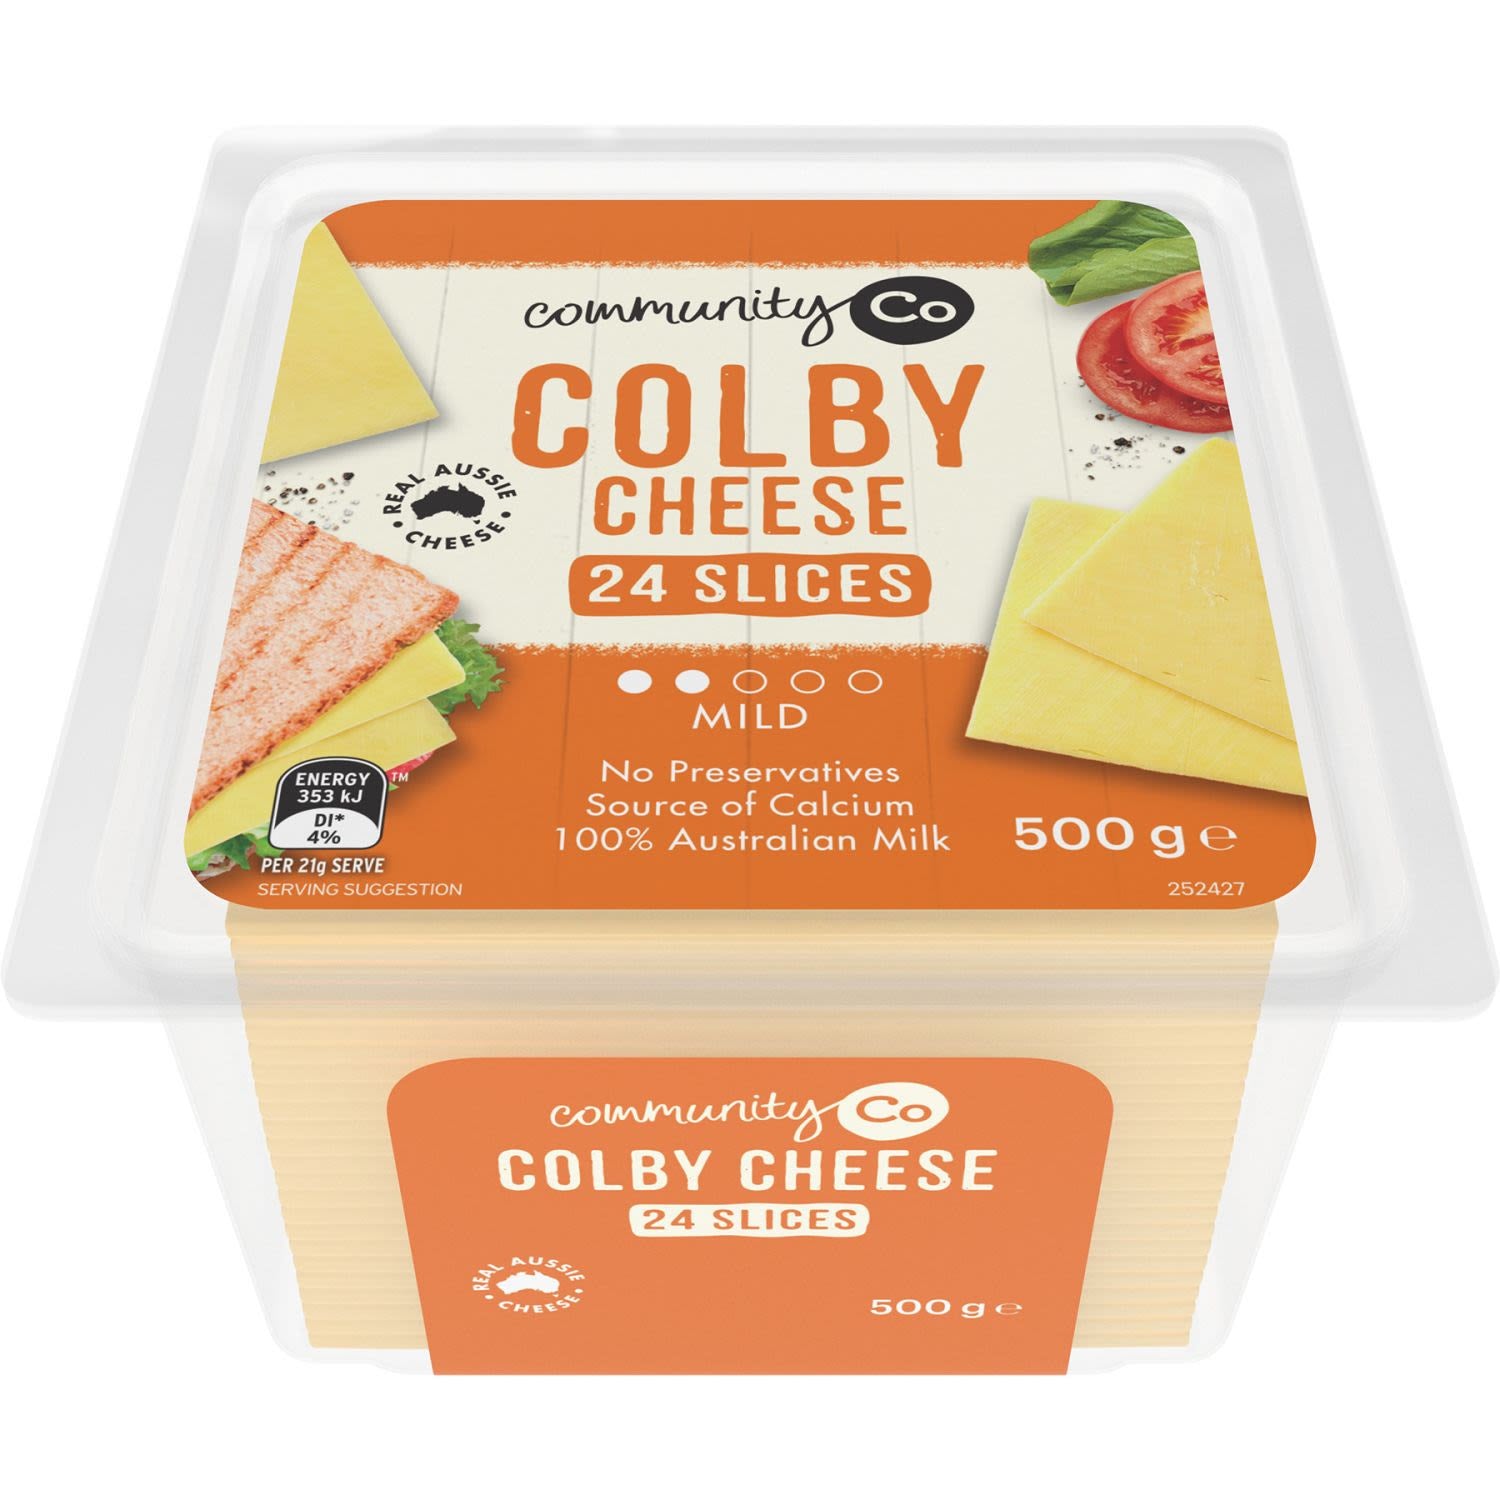 Community Co Colby Cheese Slices 500g 24pk